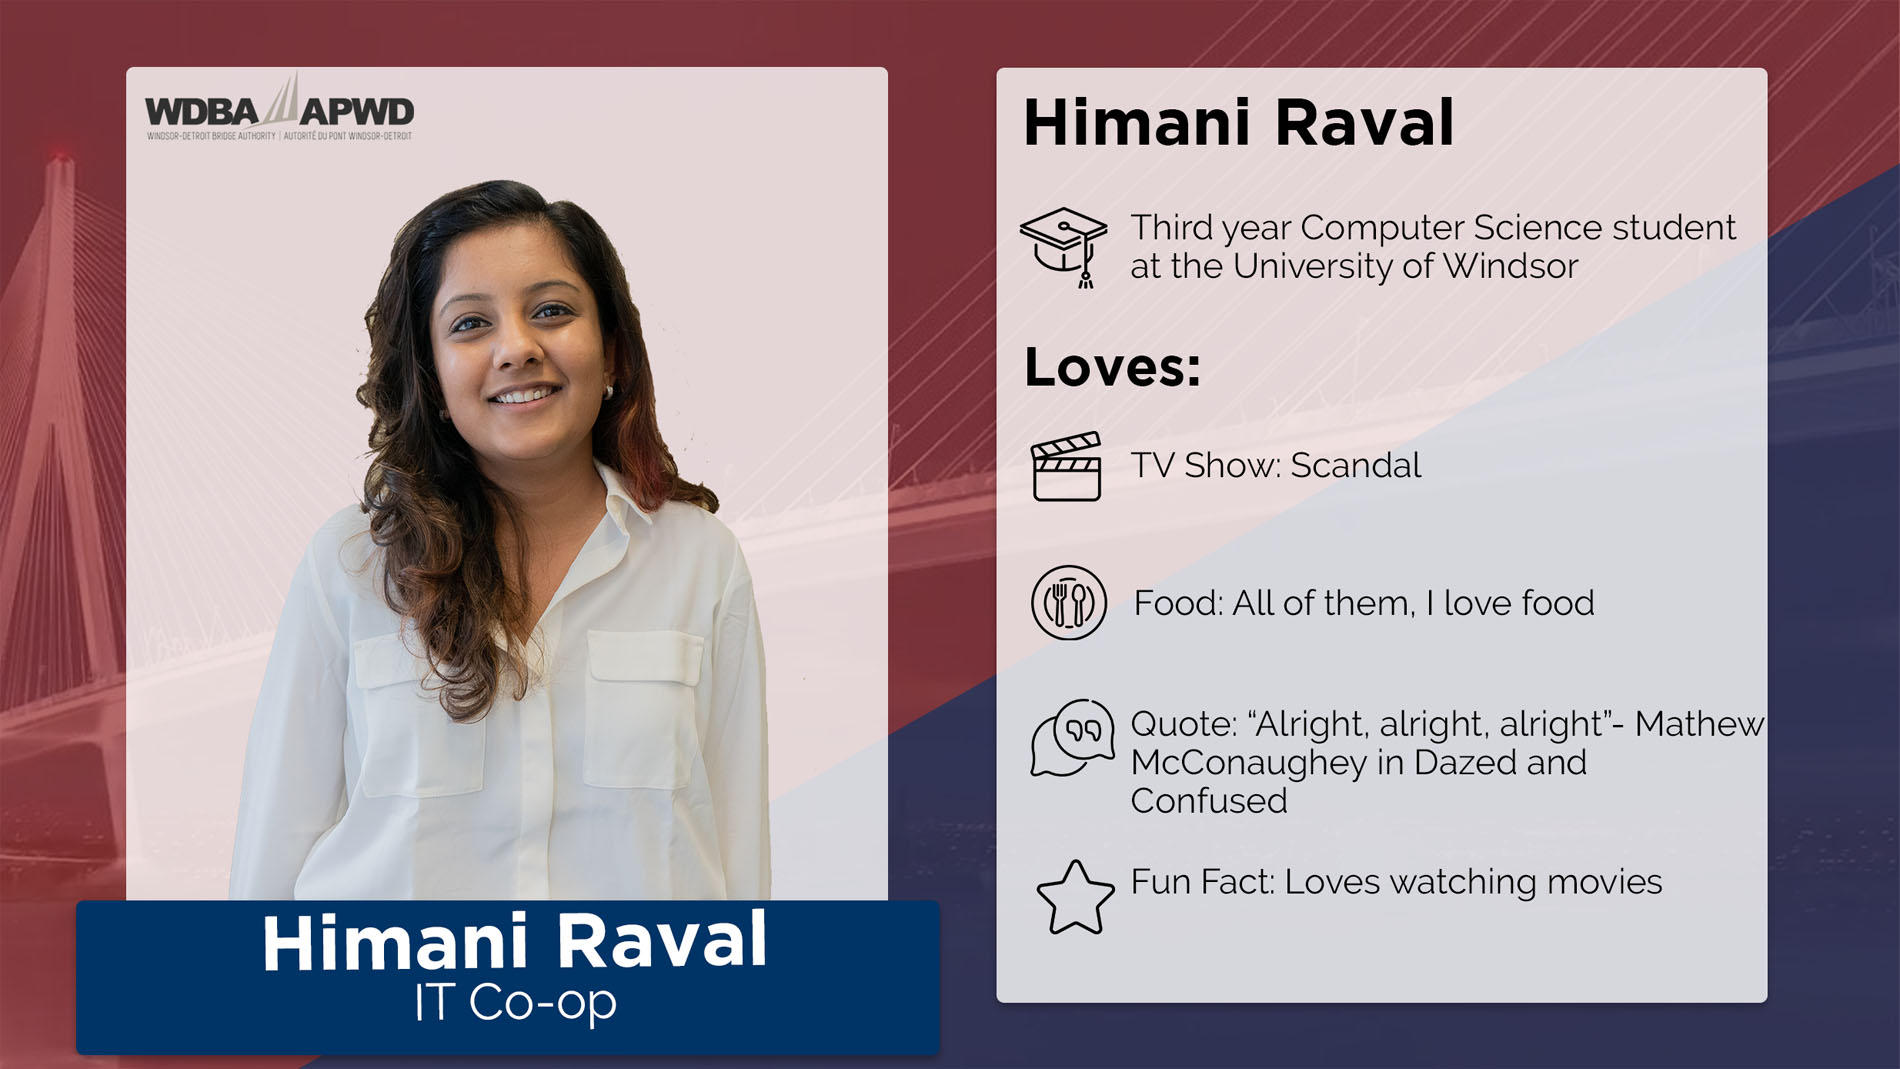 Himani Raval, IT Co-op. Third year Computer Science student at the University of Windsor. Loves: TV Shows: Scandal. Food: All of them, I love food. Quote: "Alright, alright, alright" - Mathew McConaughey in Dazed and Confused. Fun Fact: Loves watching movies. 